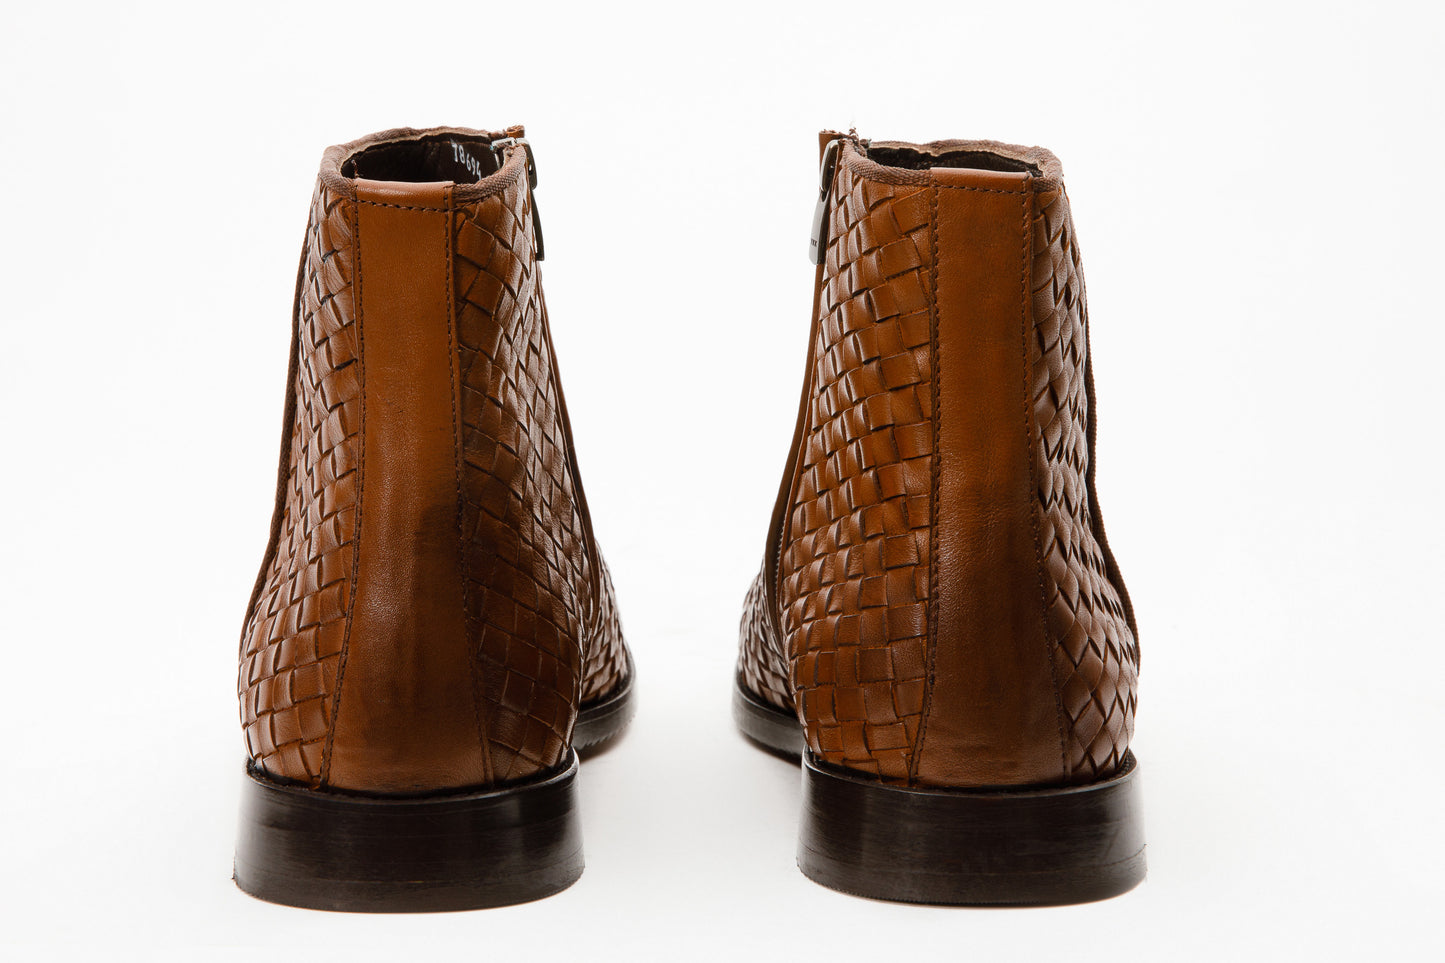 The Wellington Tan Handwoven Leather Men Boot with a Zipper